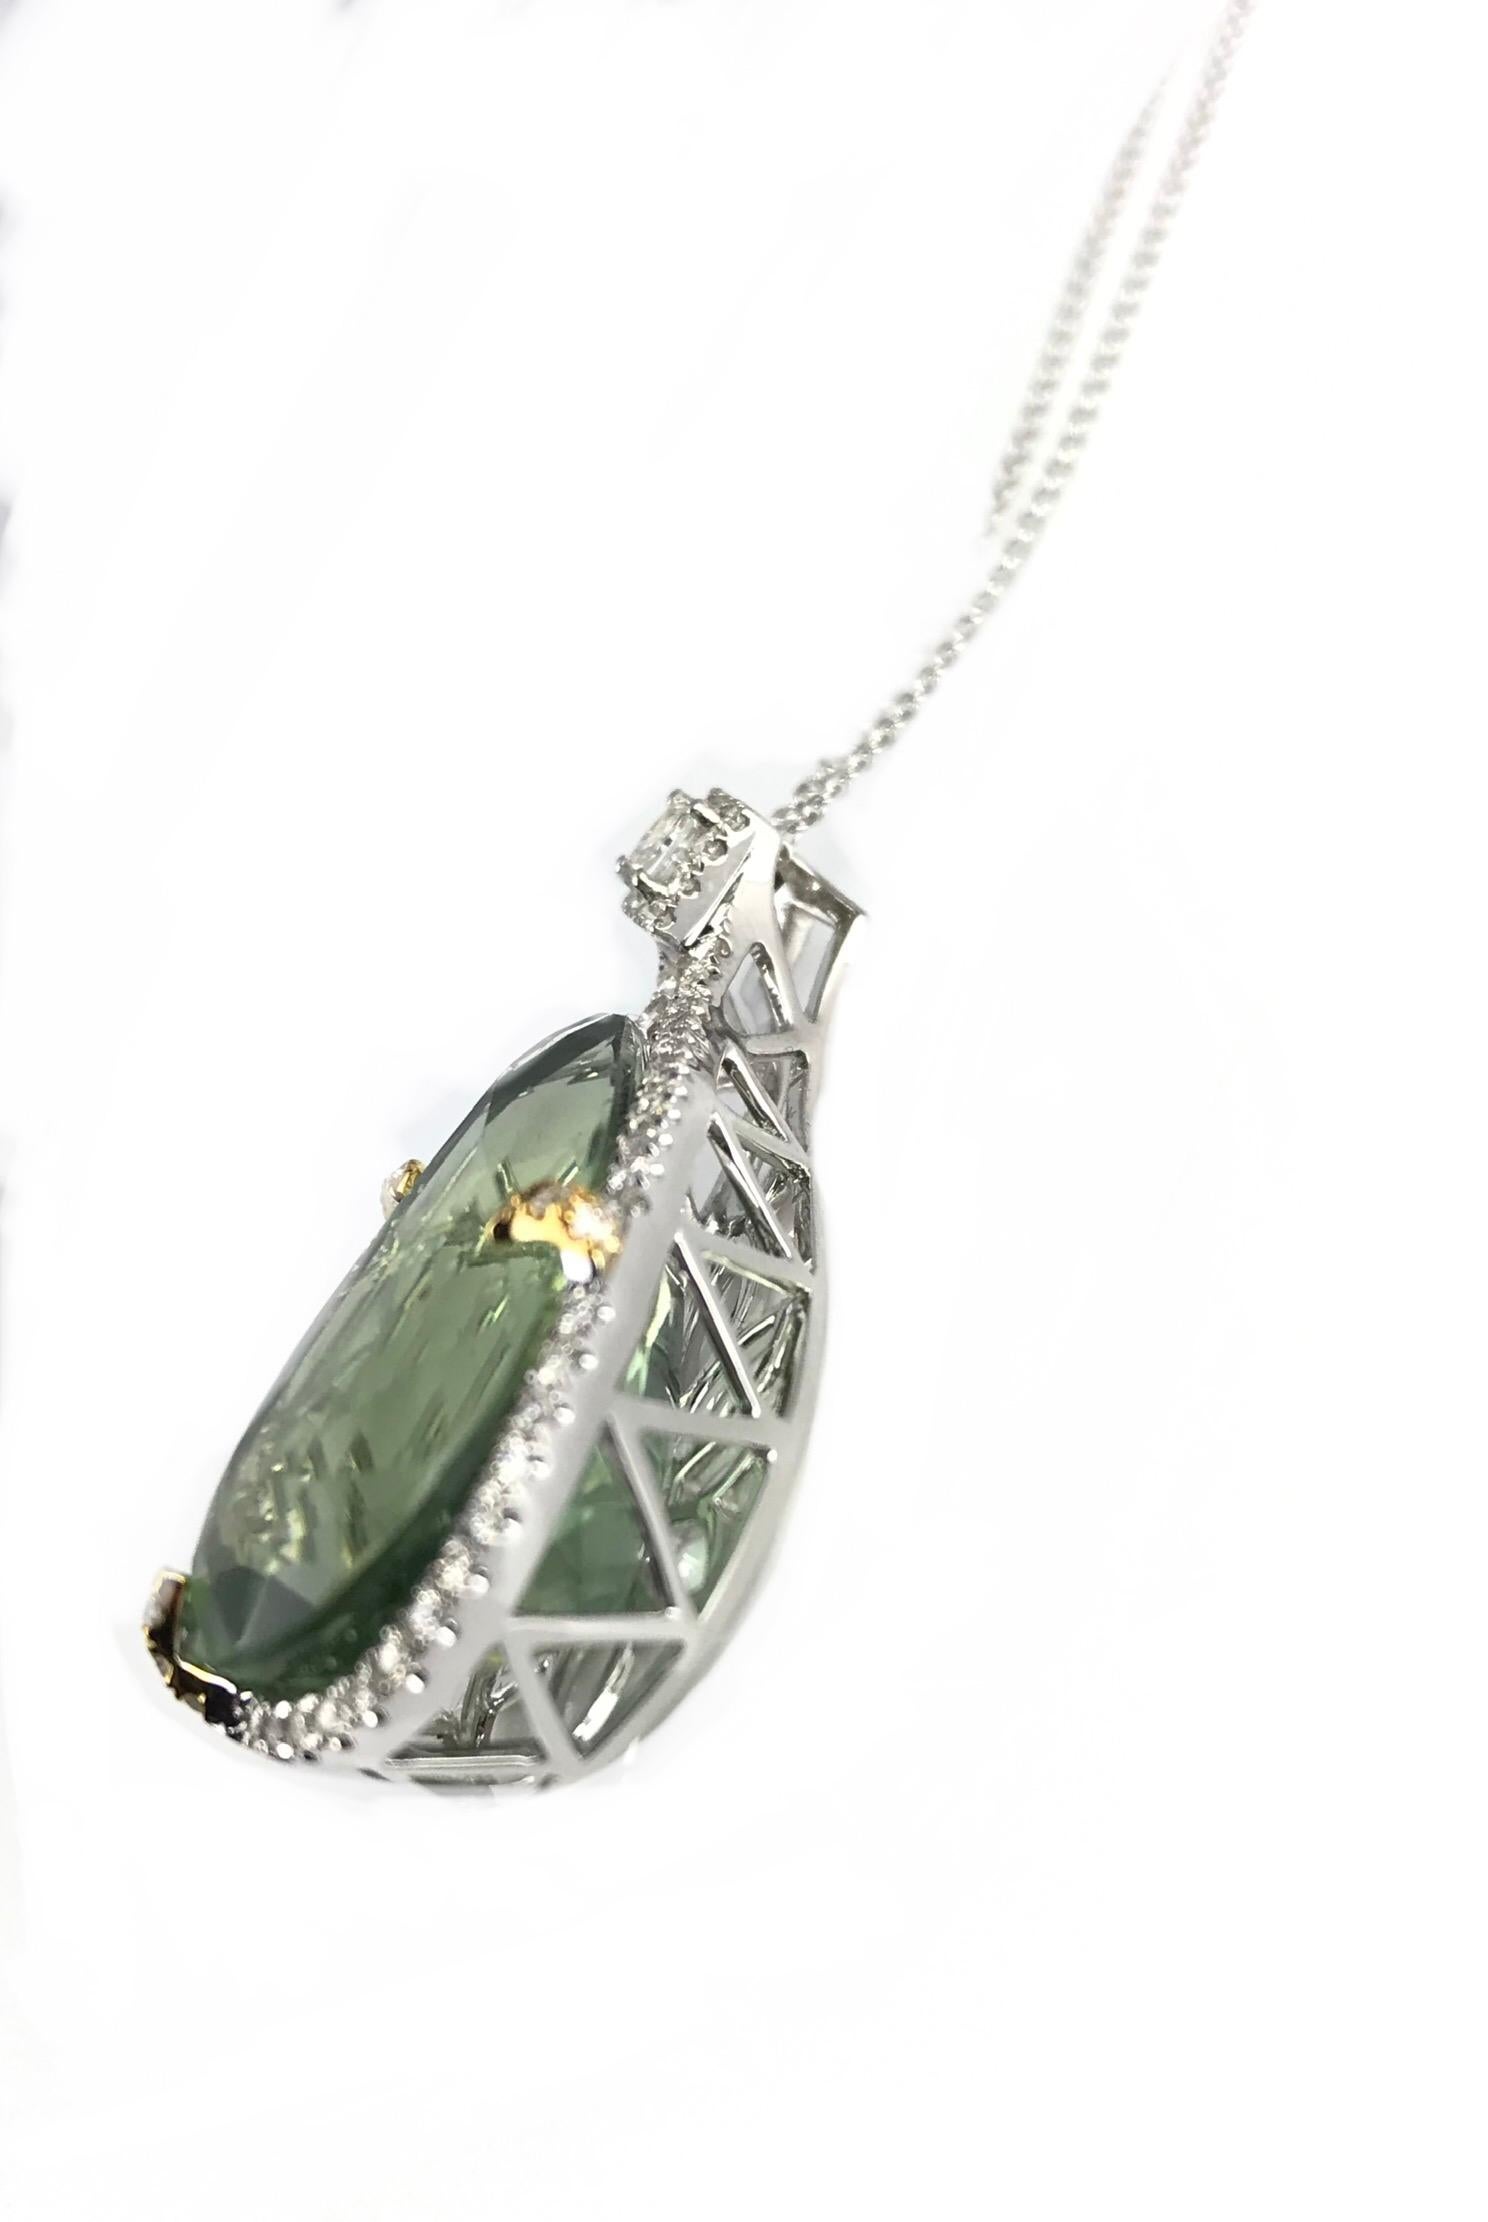 (DiamondTown) This stunning pendant has a 16.06 carat pear shaped exotic kiwi green amethyst, tucked inside a border of round white diamonds. One princess cut diamond, also in a halo of smaller diamonds, decorates the bail. Total diamond weight 0.53